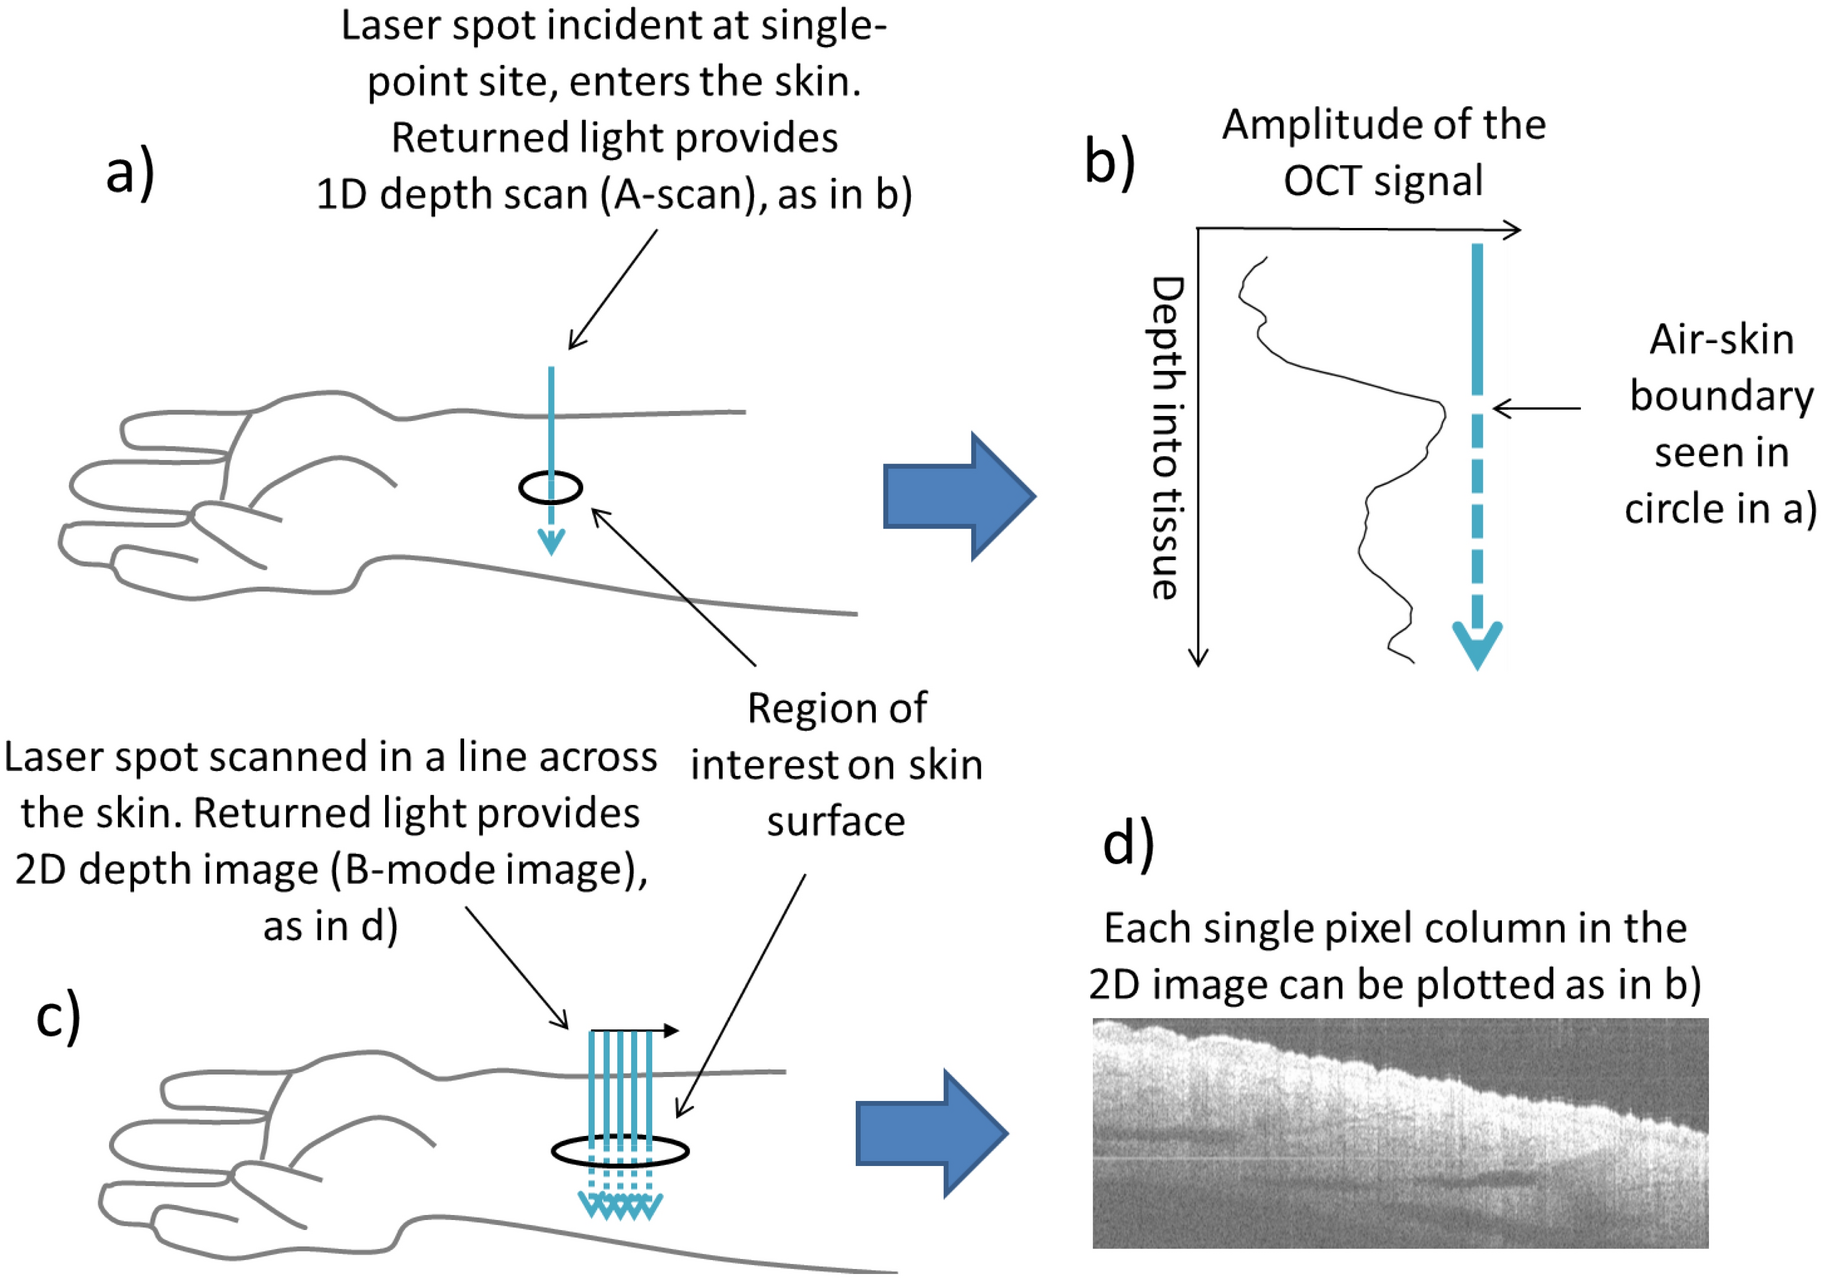 Polarisation-sensitive optical coherence tomography measurement of  retardance in fibrosis, a non-invasive biomarker in patients with systemic  sclerosis | Scientific Reports